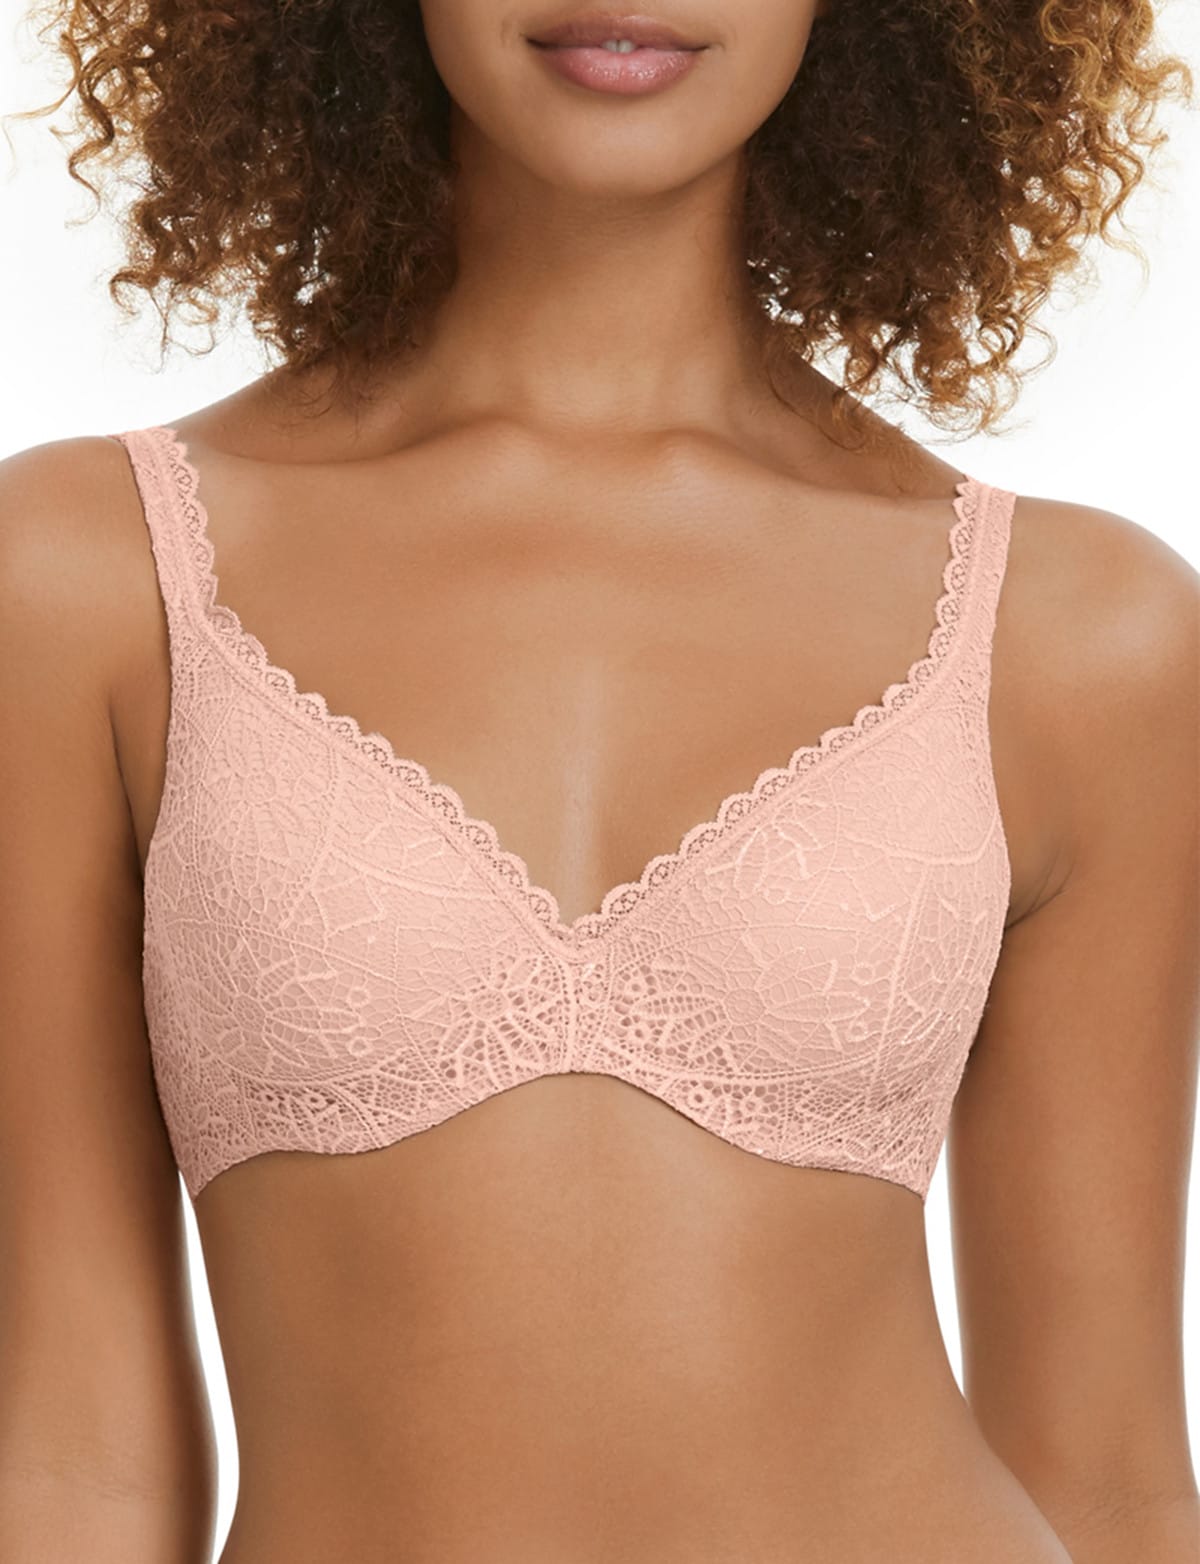 Berlei Barely There Lace T-Shirt Bra, Nude, A-E - Bras